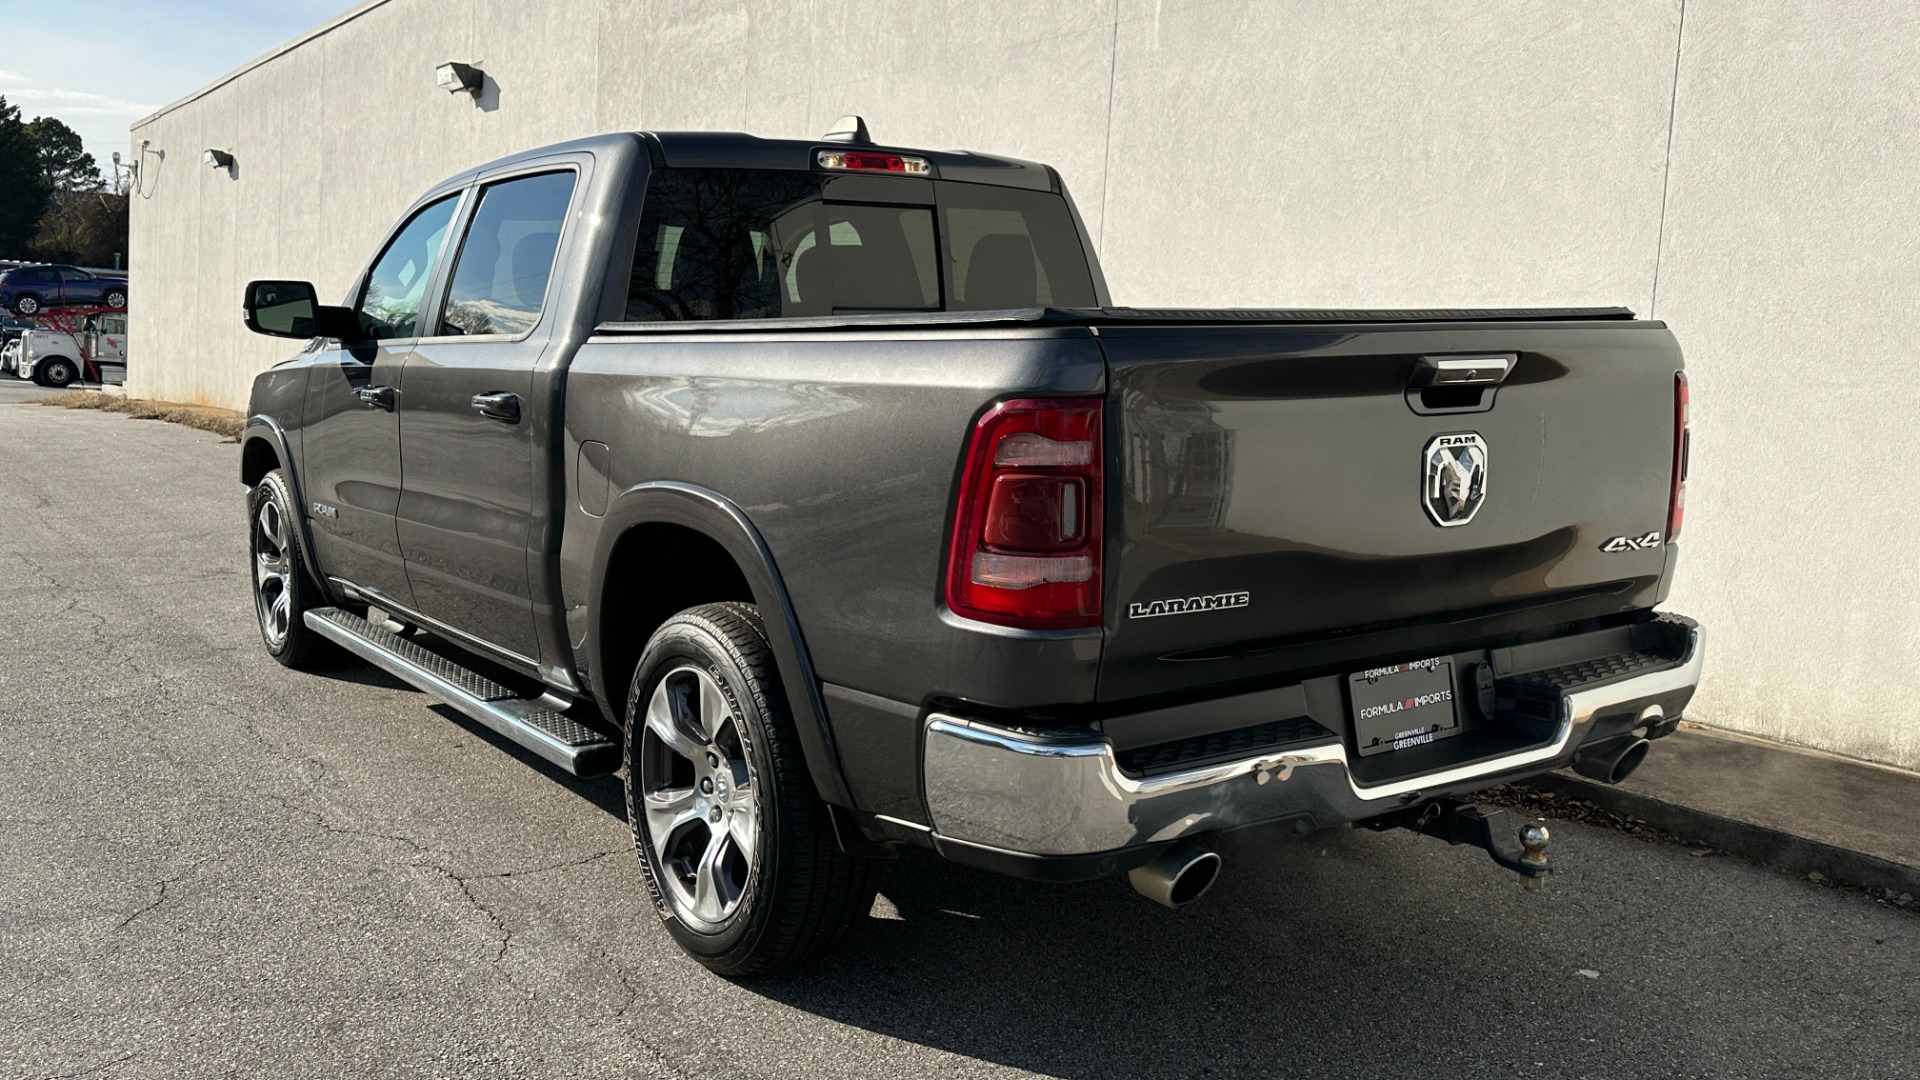 Used 2020 Ram 1500 LARAMIE / LEVEL 1 GROUP / PANORAMIC SUNROOF / 20IN WHEELS / LEATHER for sale $44,995 at Formula Imports in Charlotte NC 28227 4